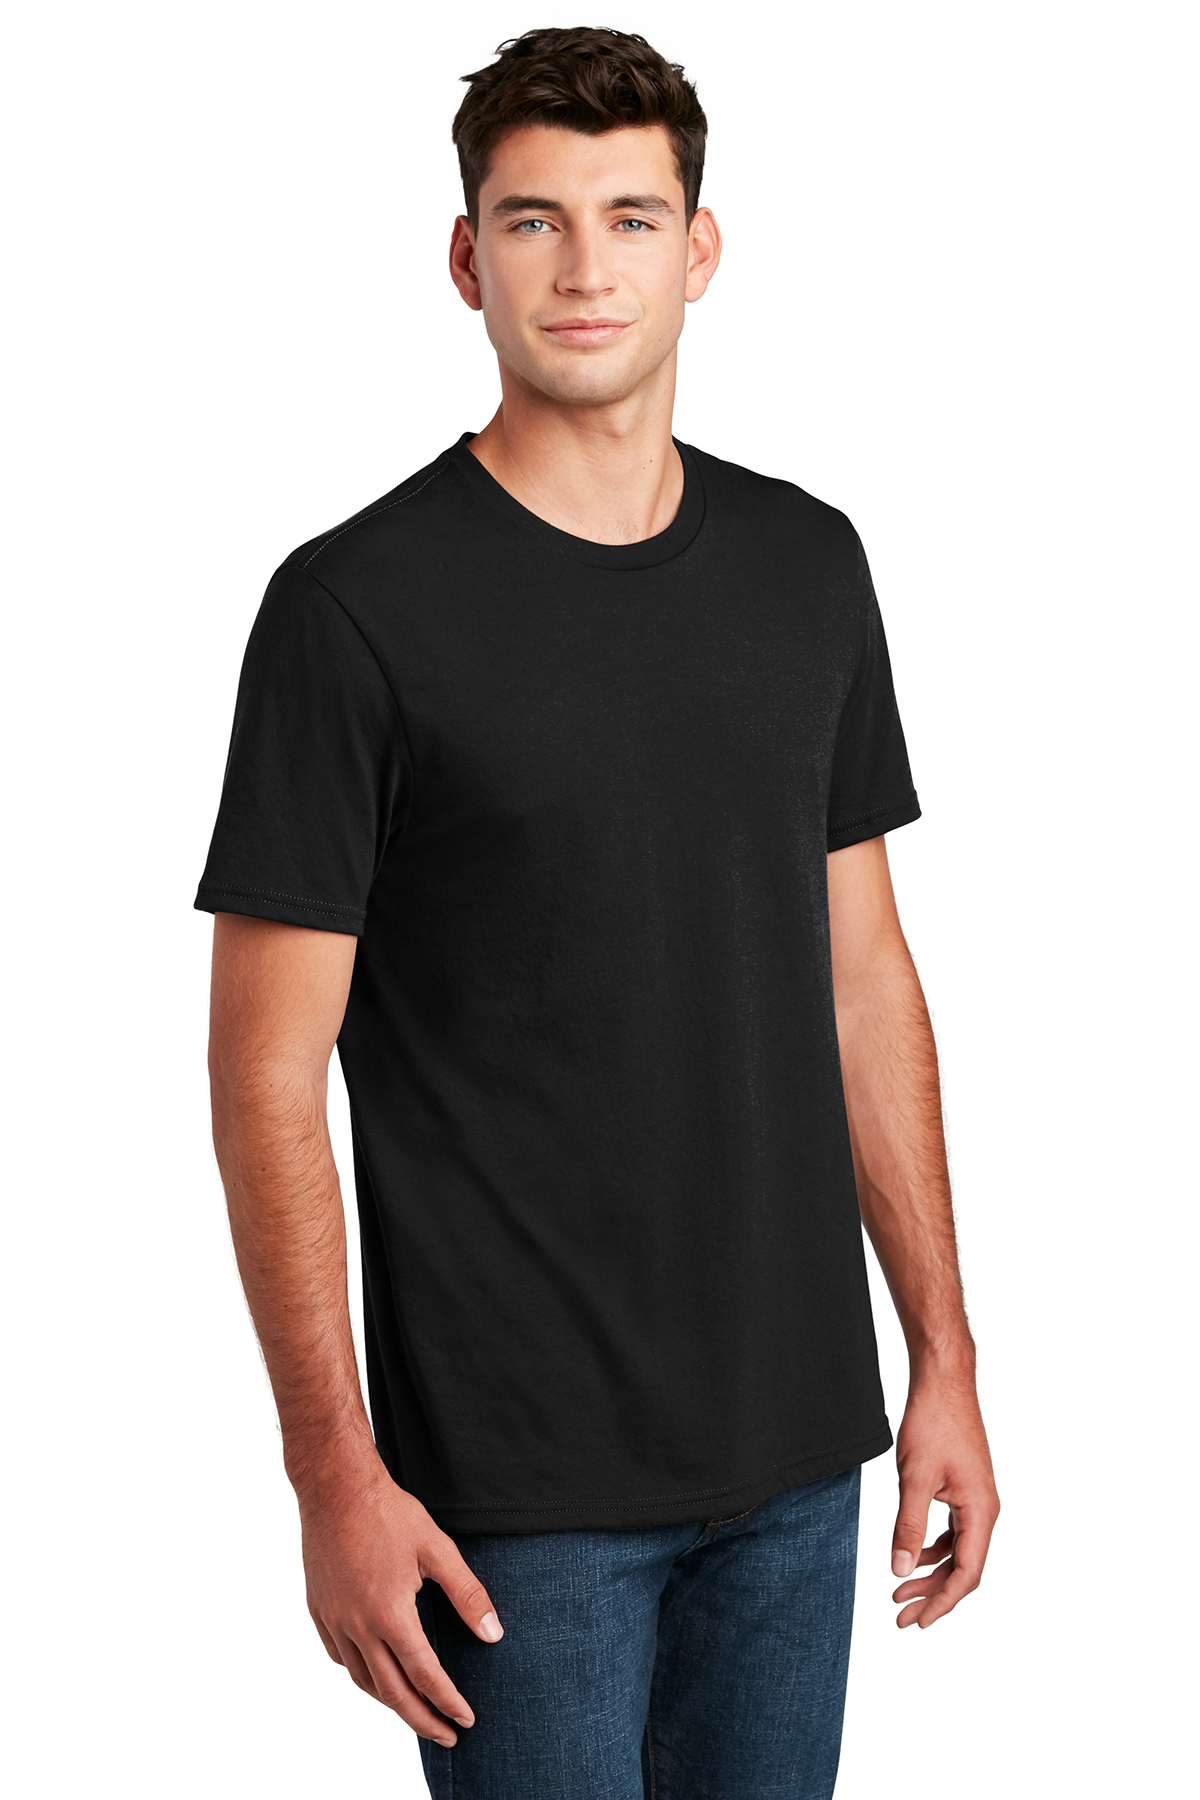 District Perfect Blend Tee | Product | District